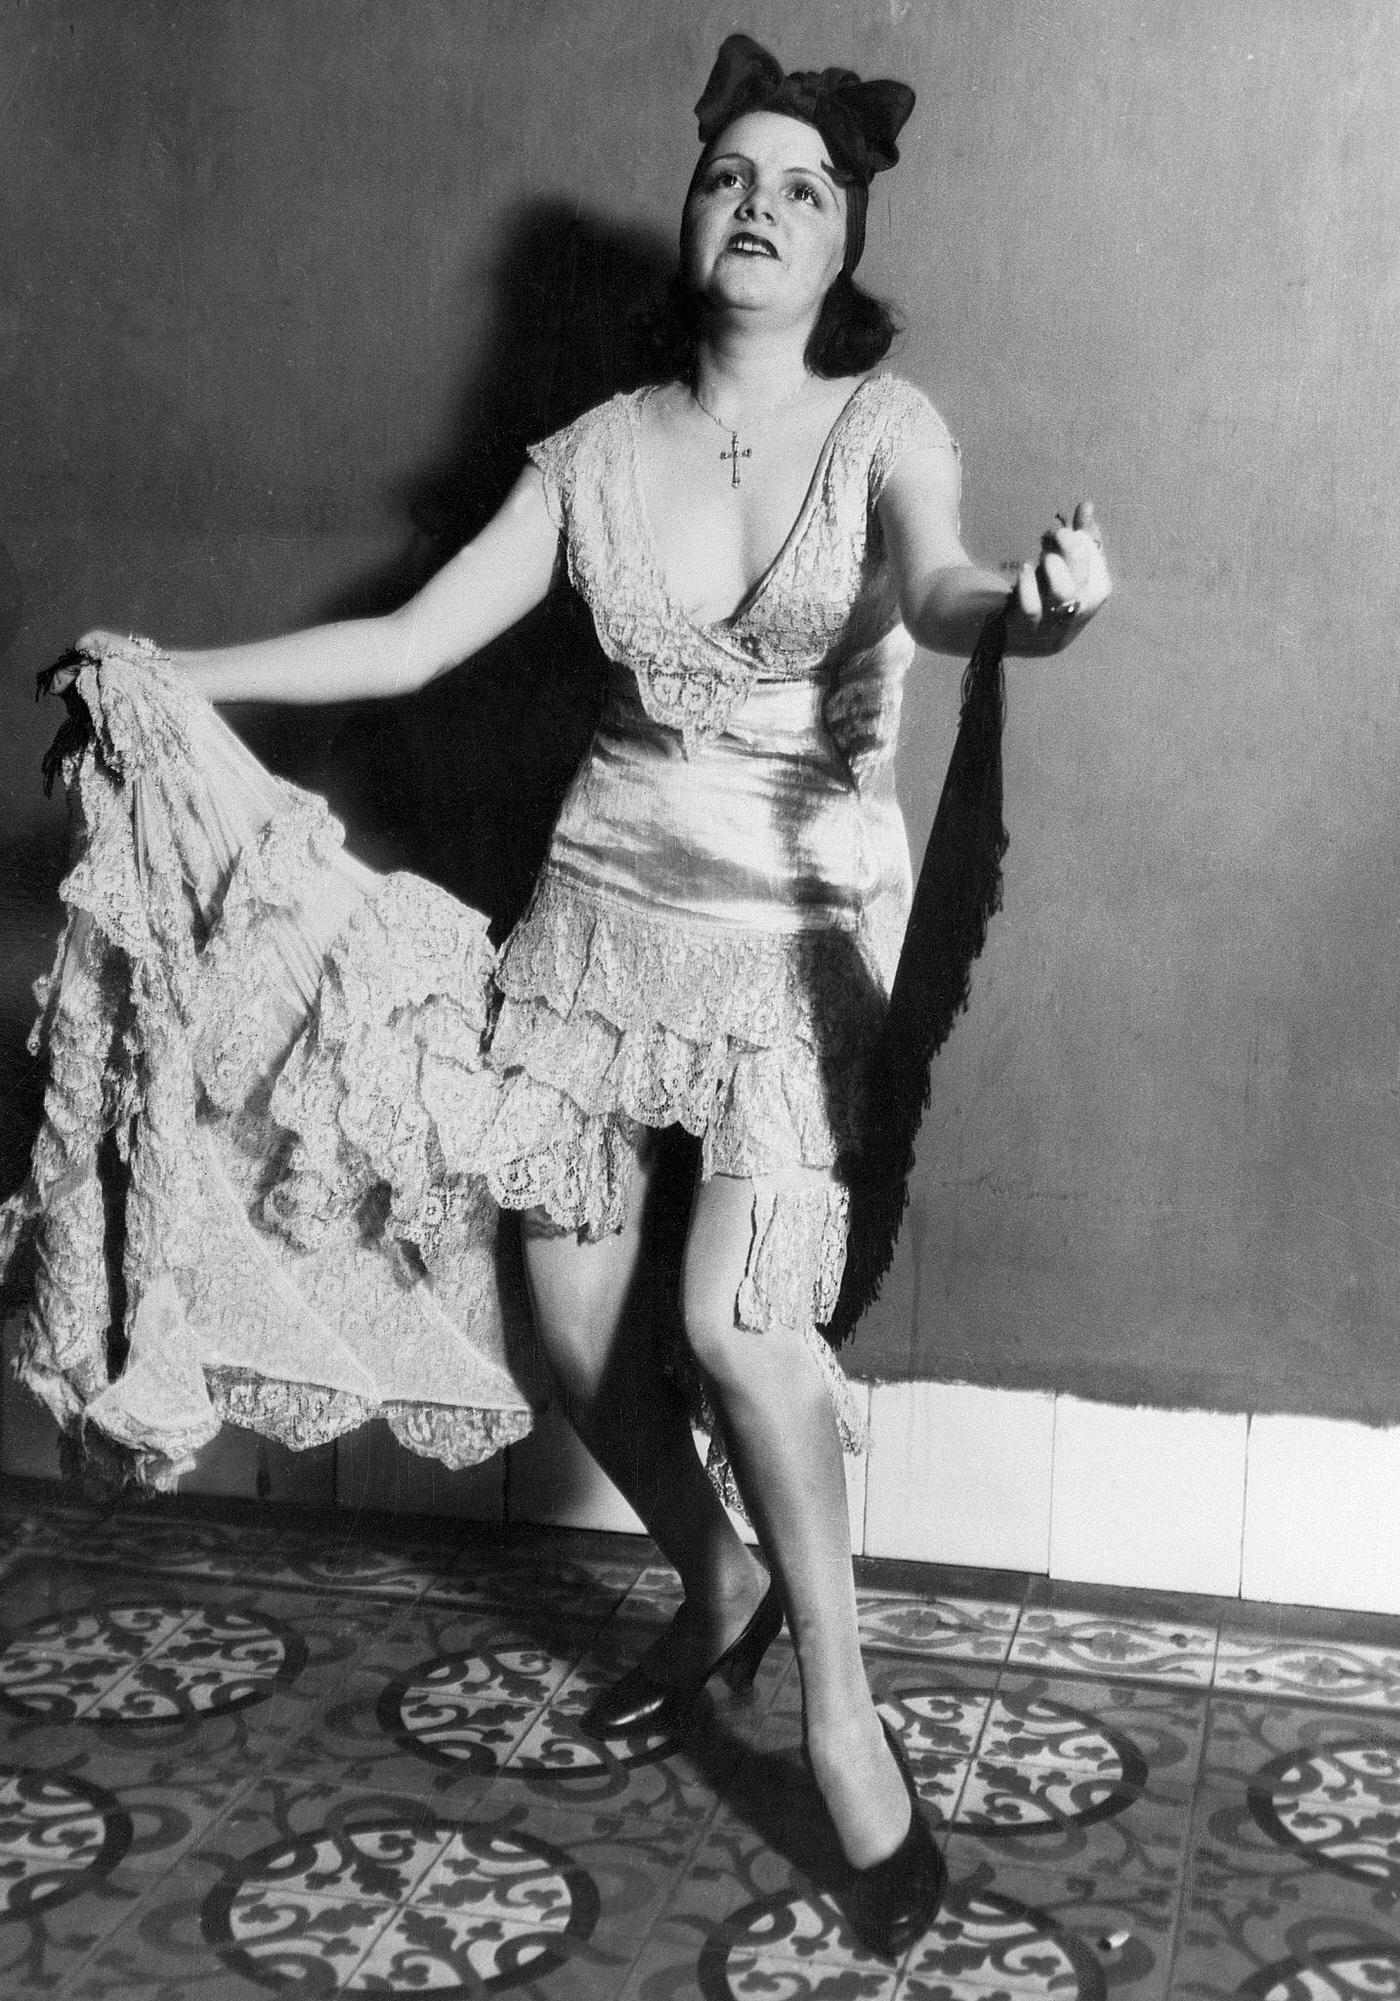 A typical "Rumba" dancer of Cuba wearing the costume considered most proper, 1930